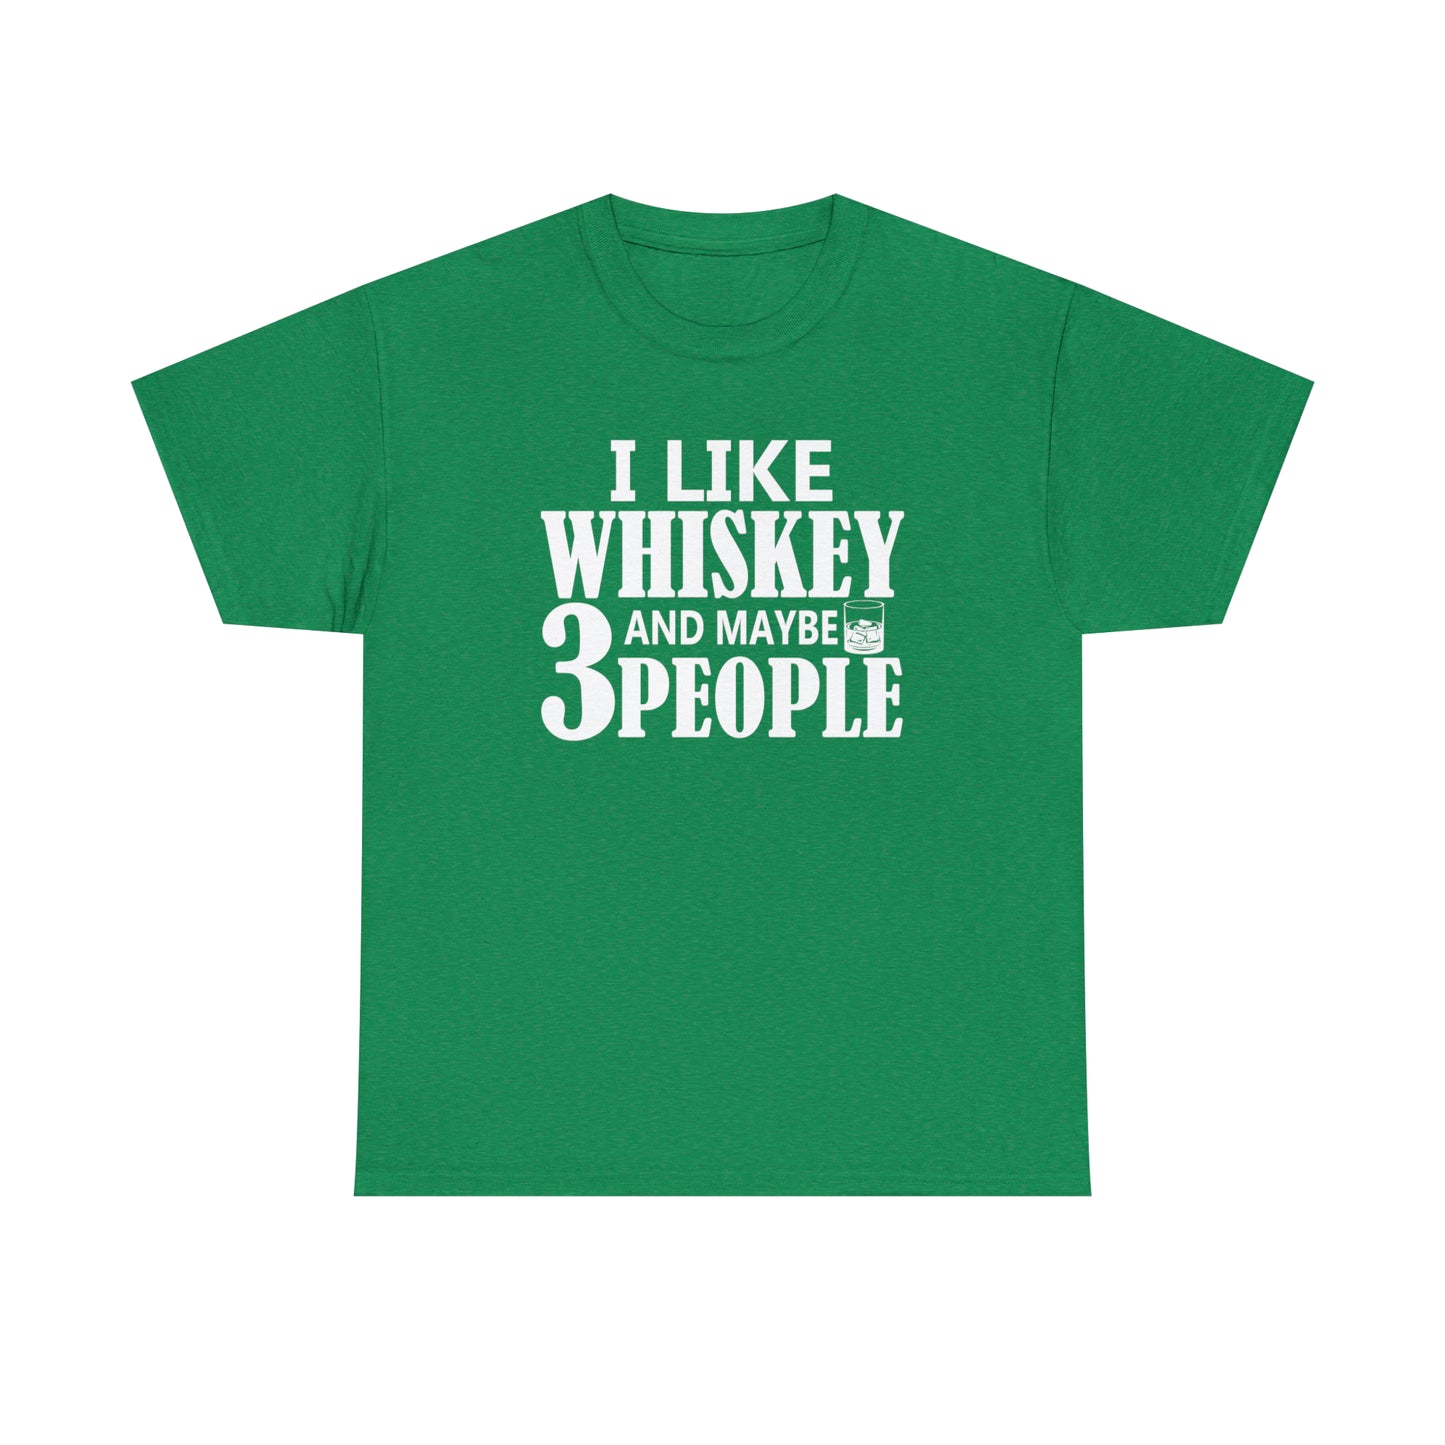 High-quality cotton t-shirt for those who love whiskey and limited company.